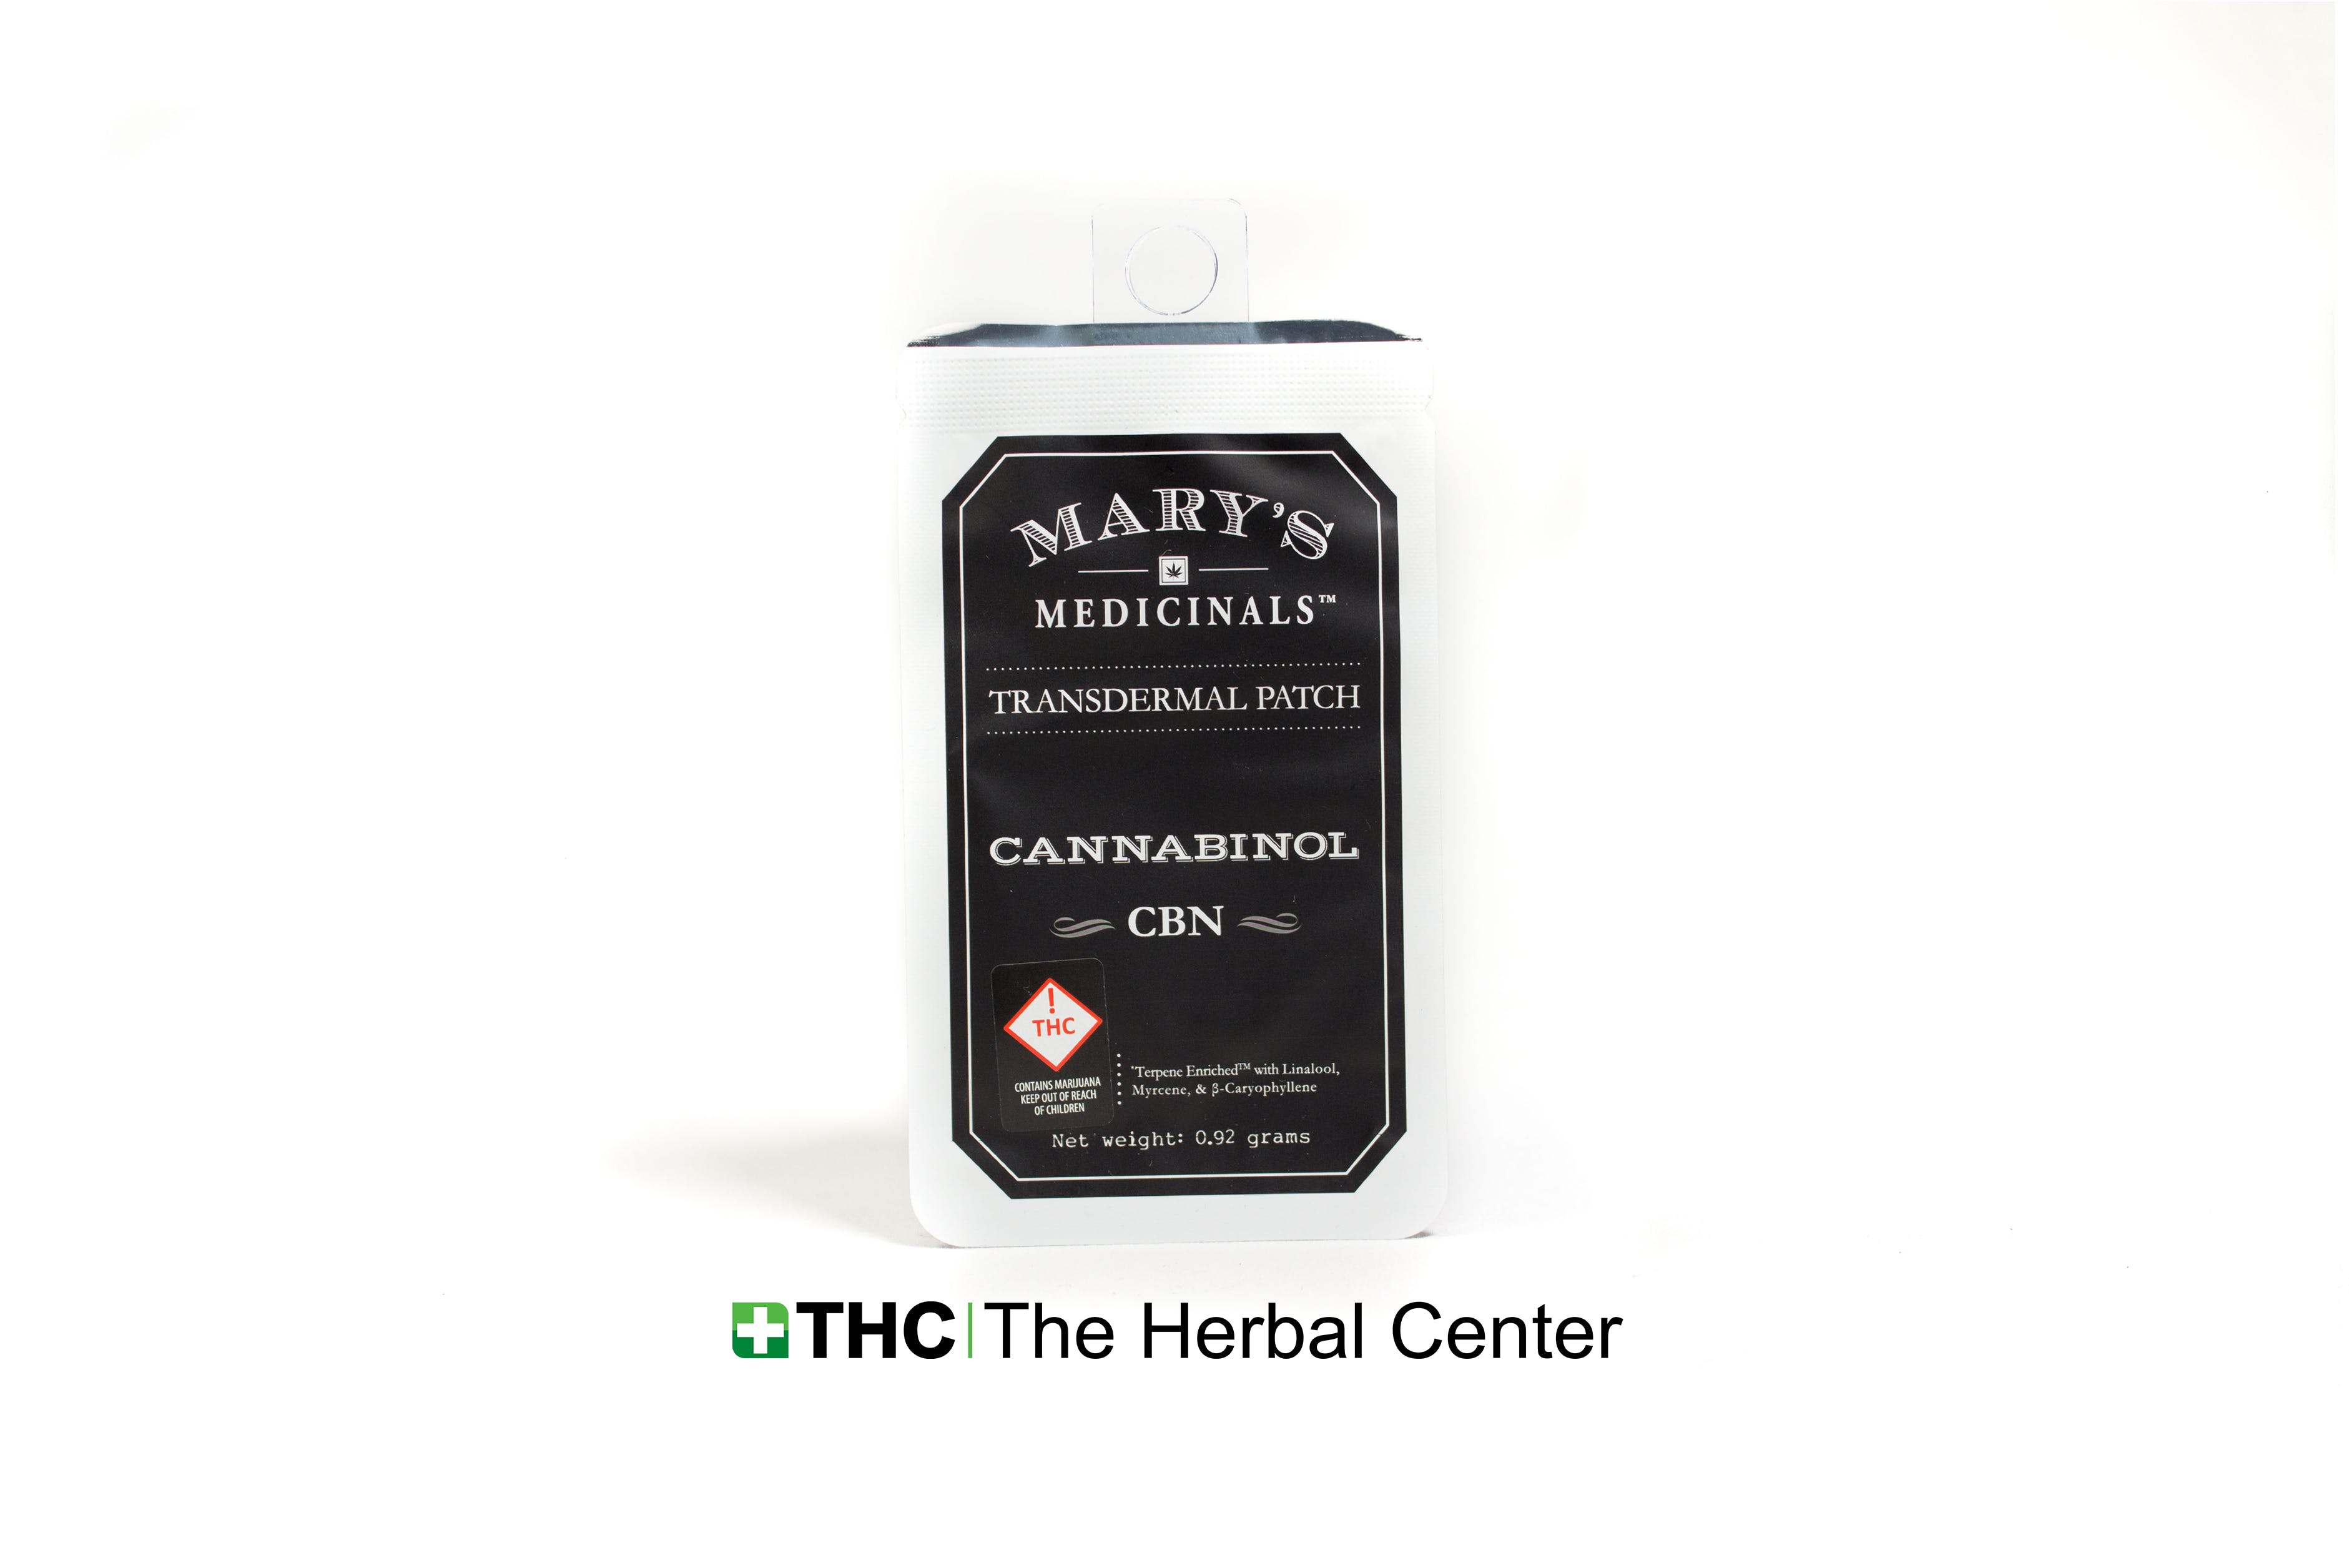 topicals-marys-medicinals-transdermal-patch-a-c2-80-c2-93-cbn